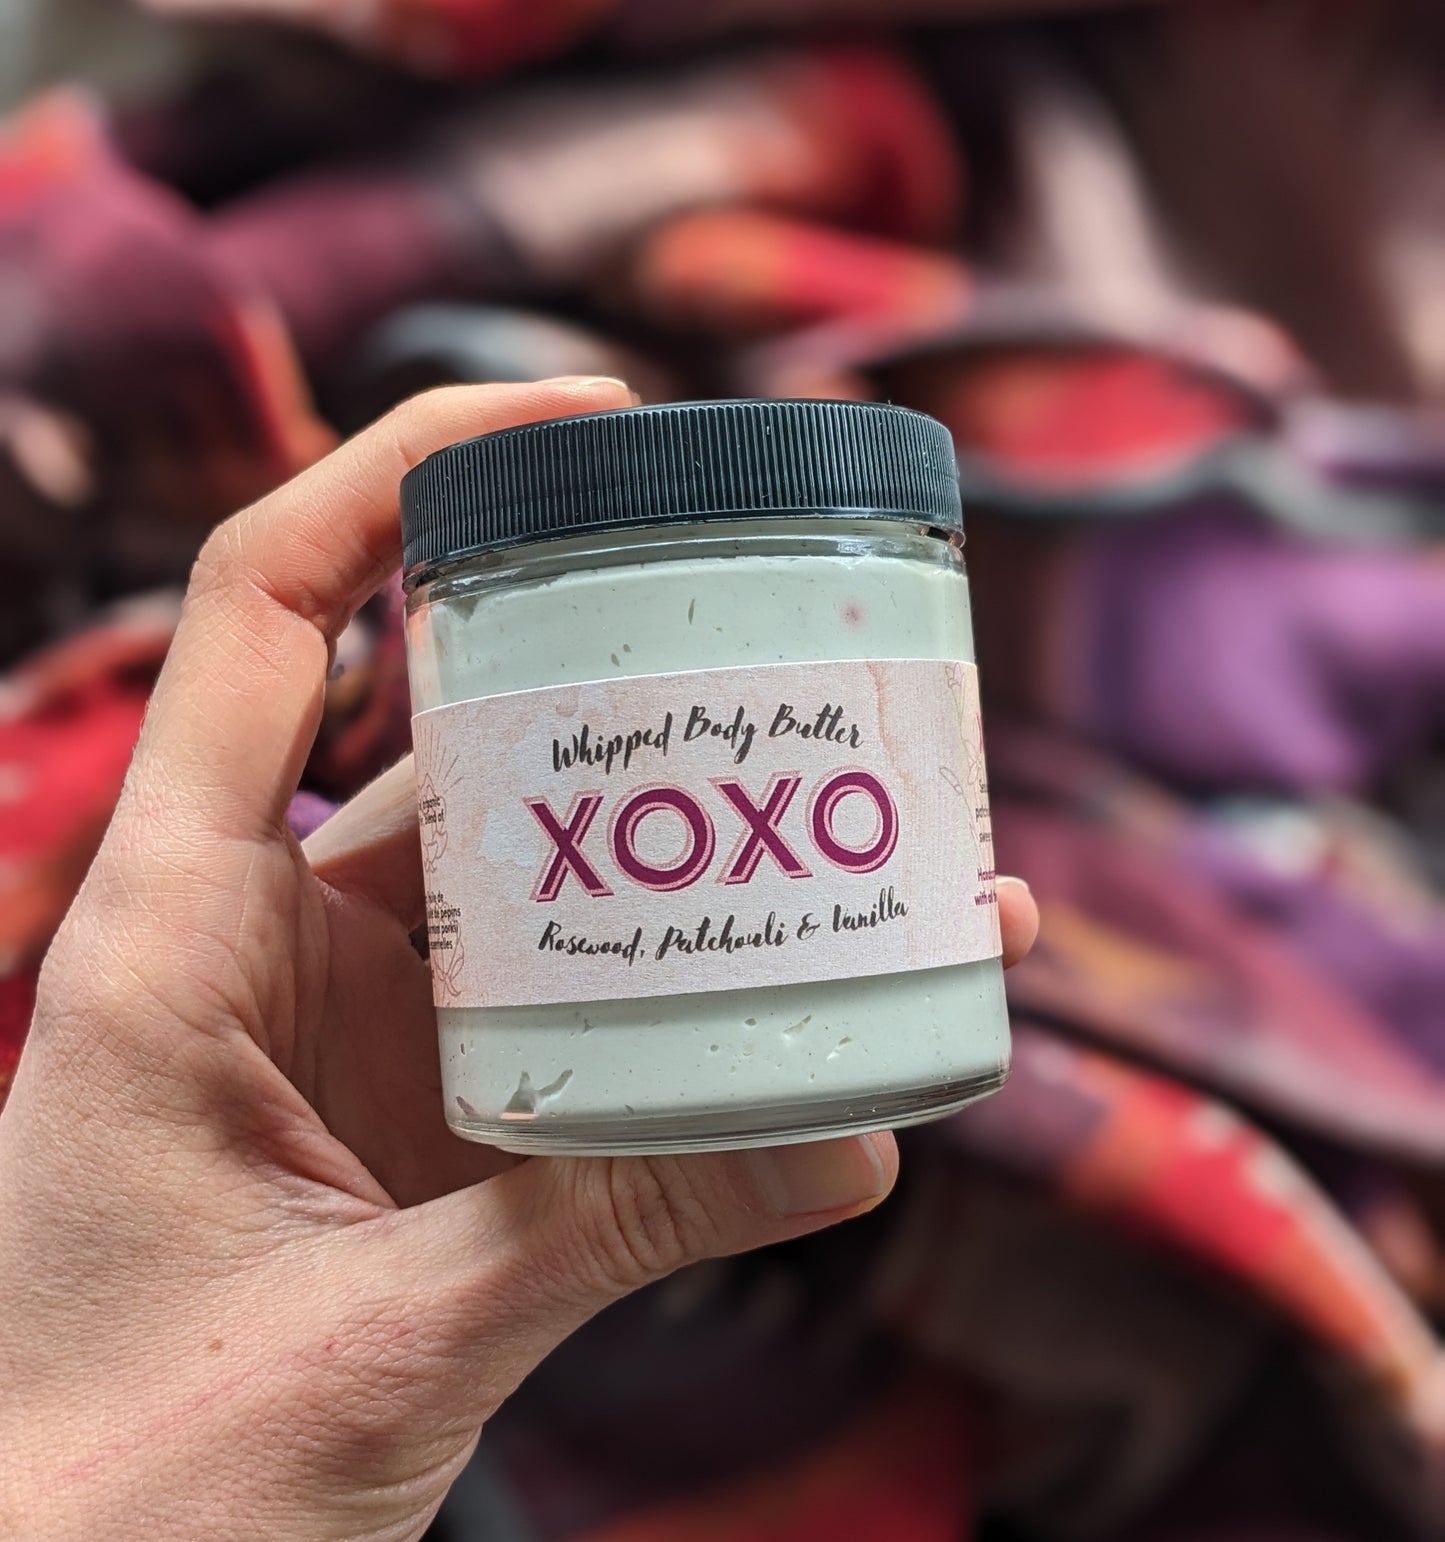 XOXO Whipped Body Butter